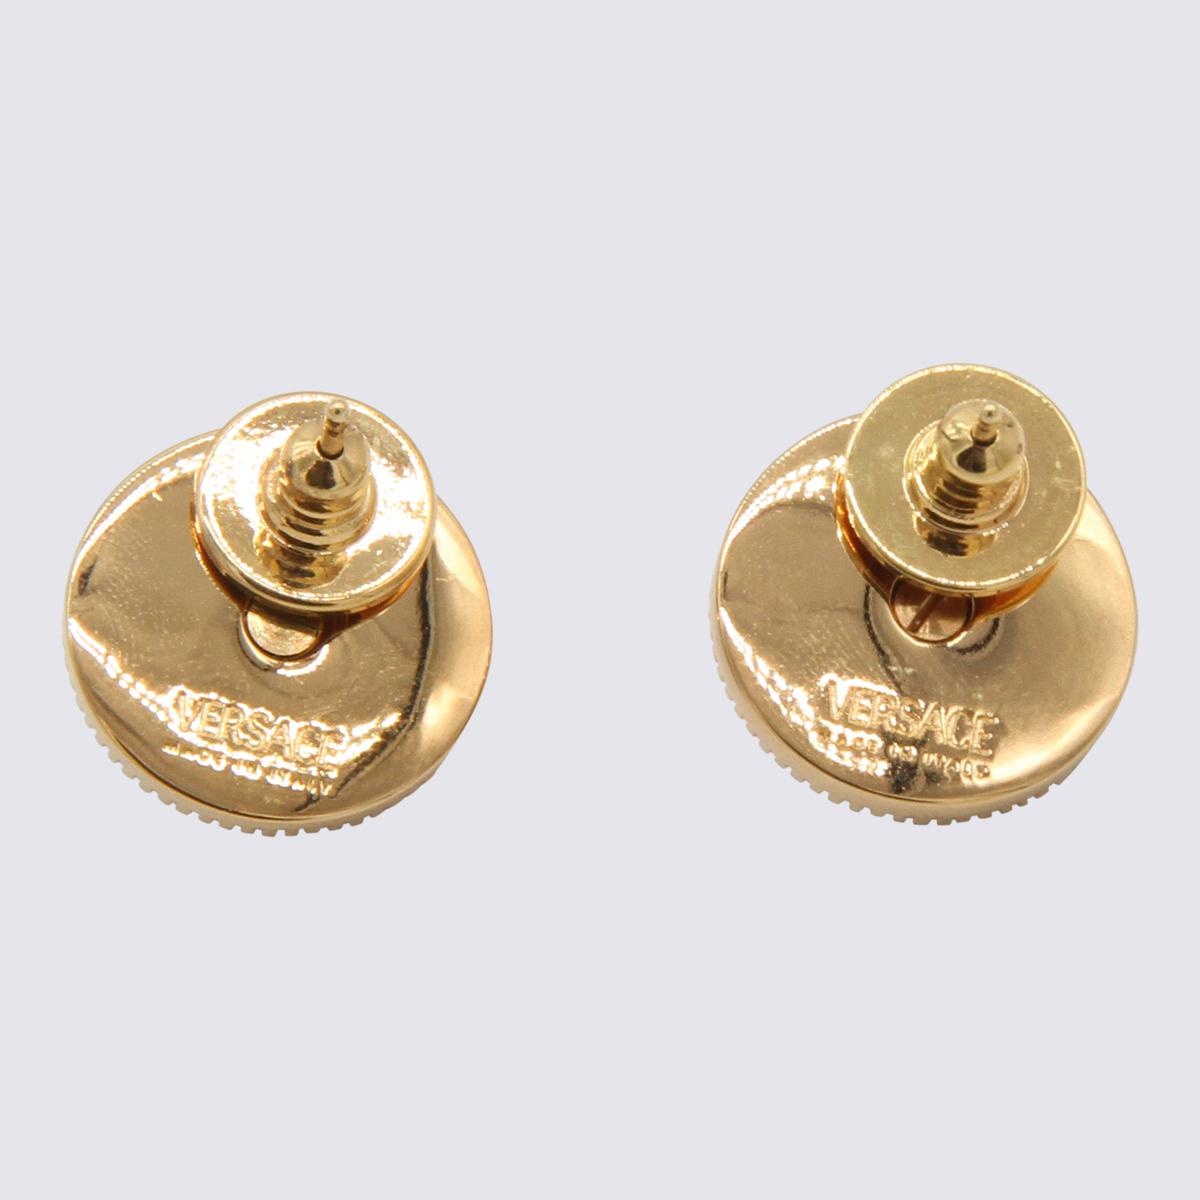 VERSACE GOLD- TONE AND SILVER METAL MEDUSA EARRINGS - 2